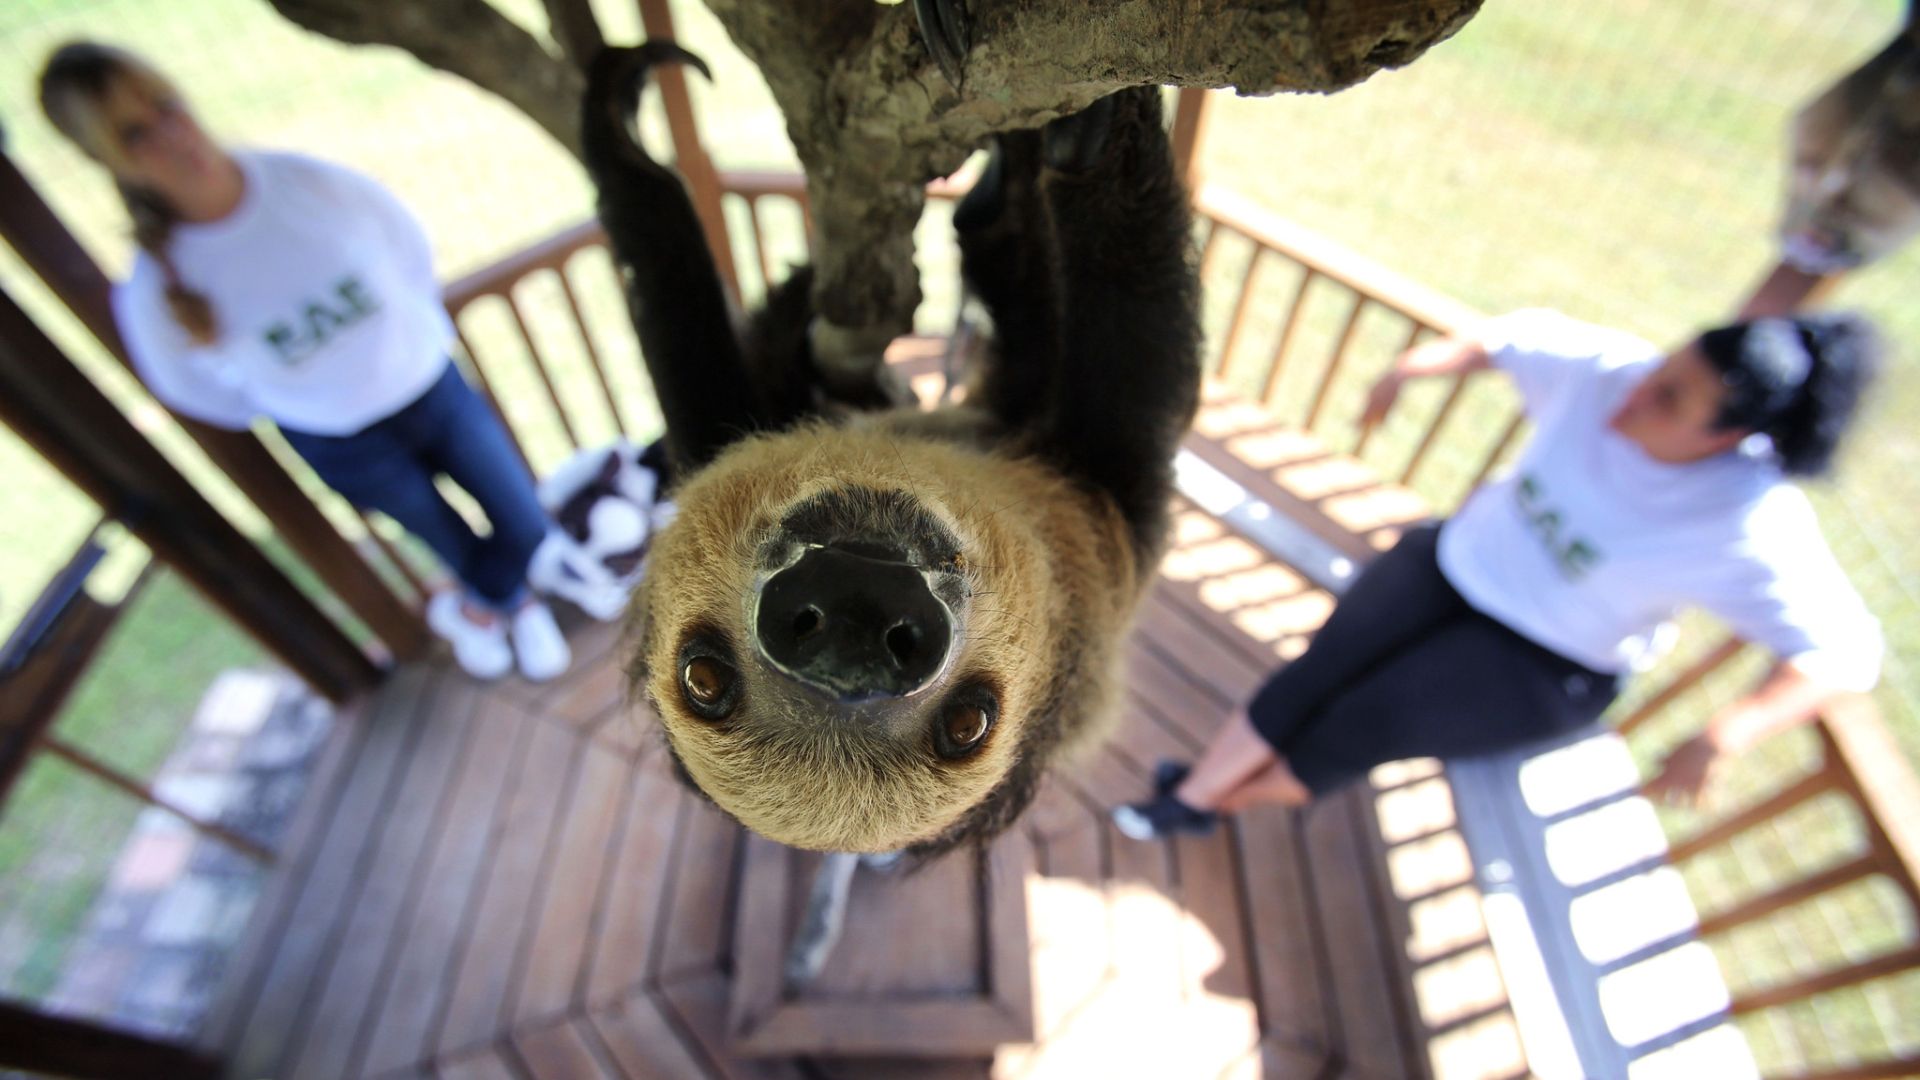 Have you hugged a sloth today?